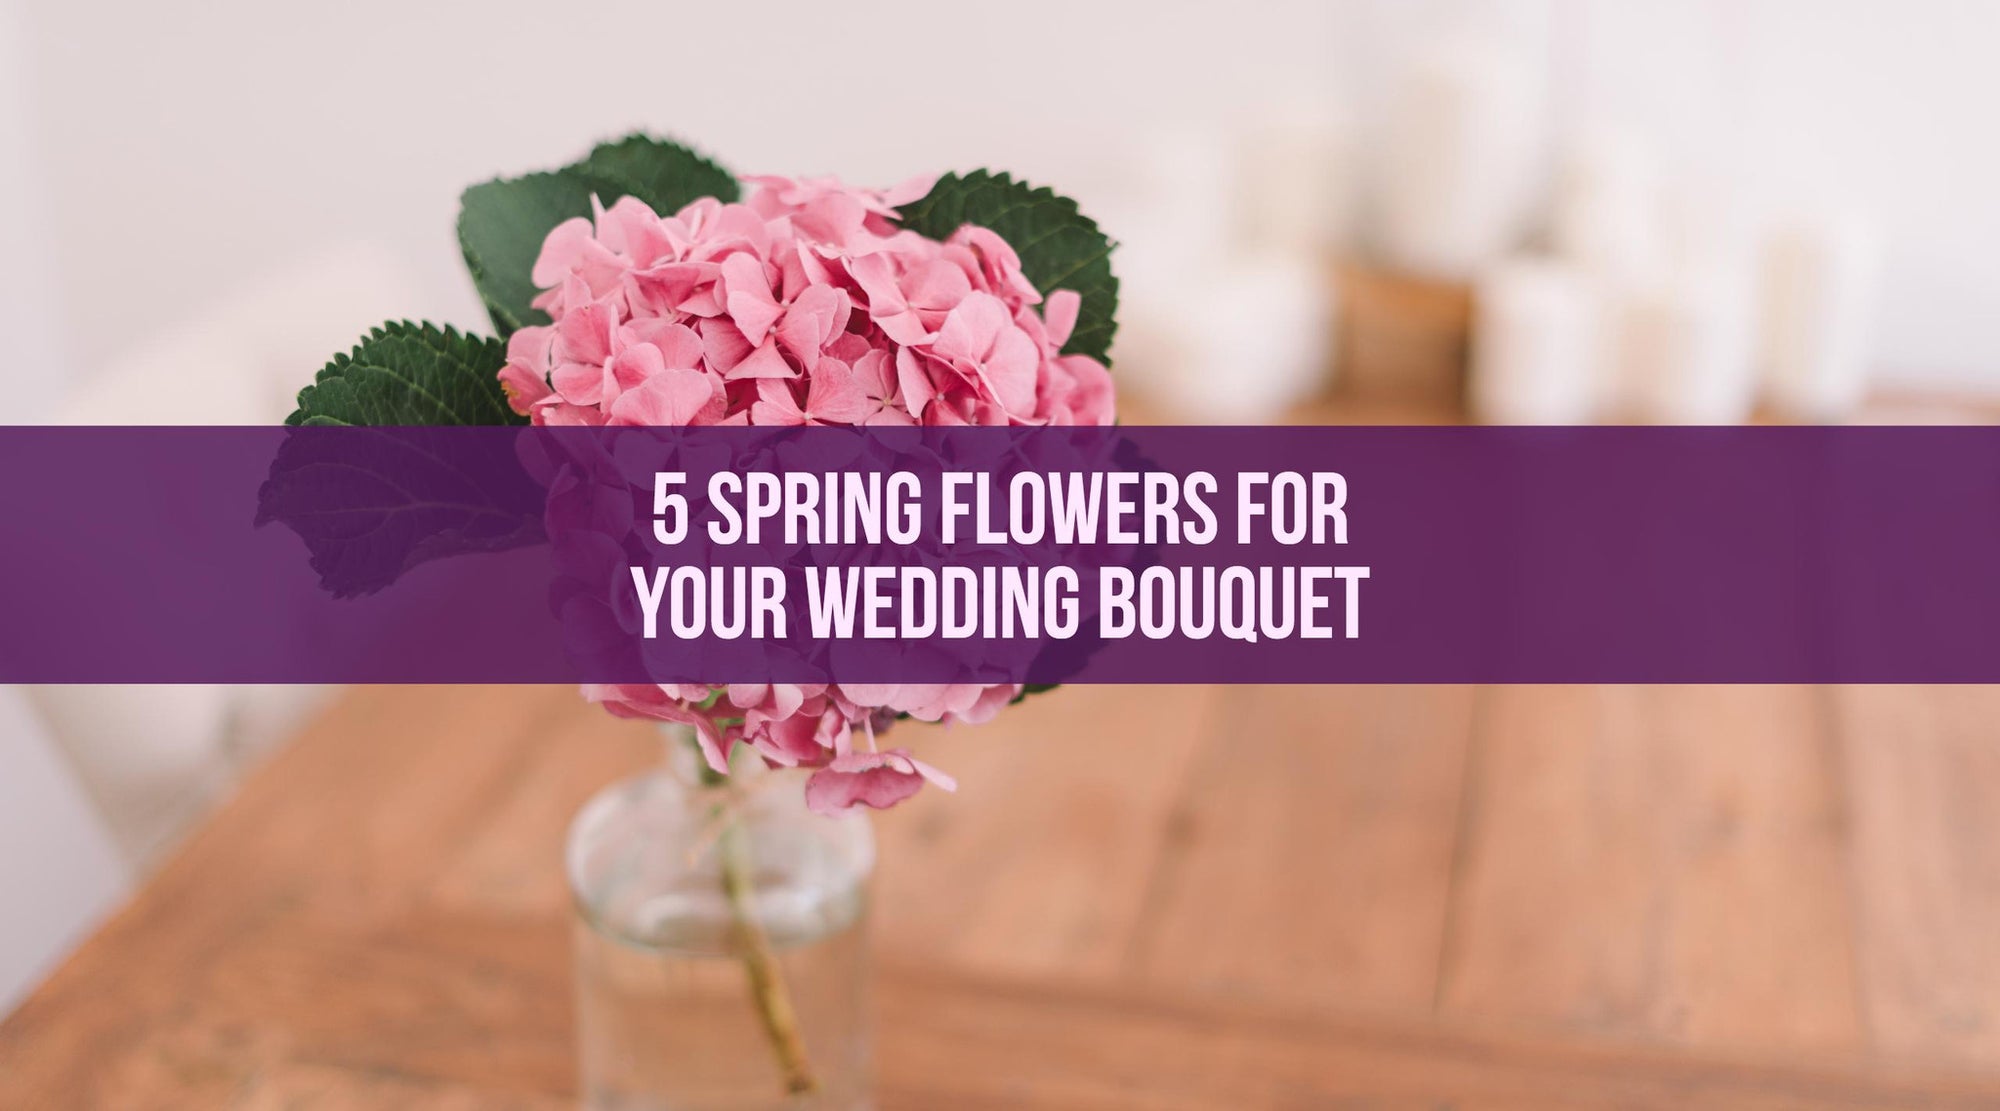 5 Spring Flowers for Your Wedding Bouquet